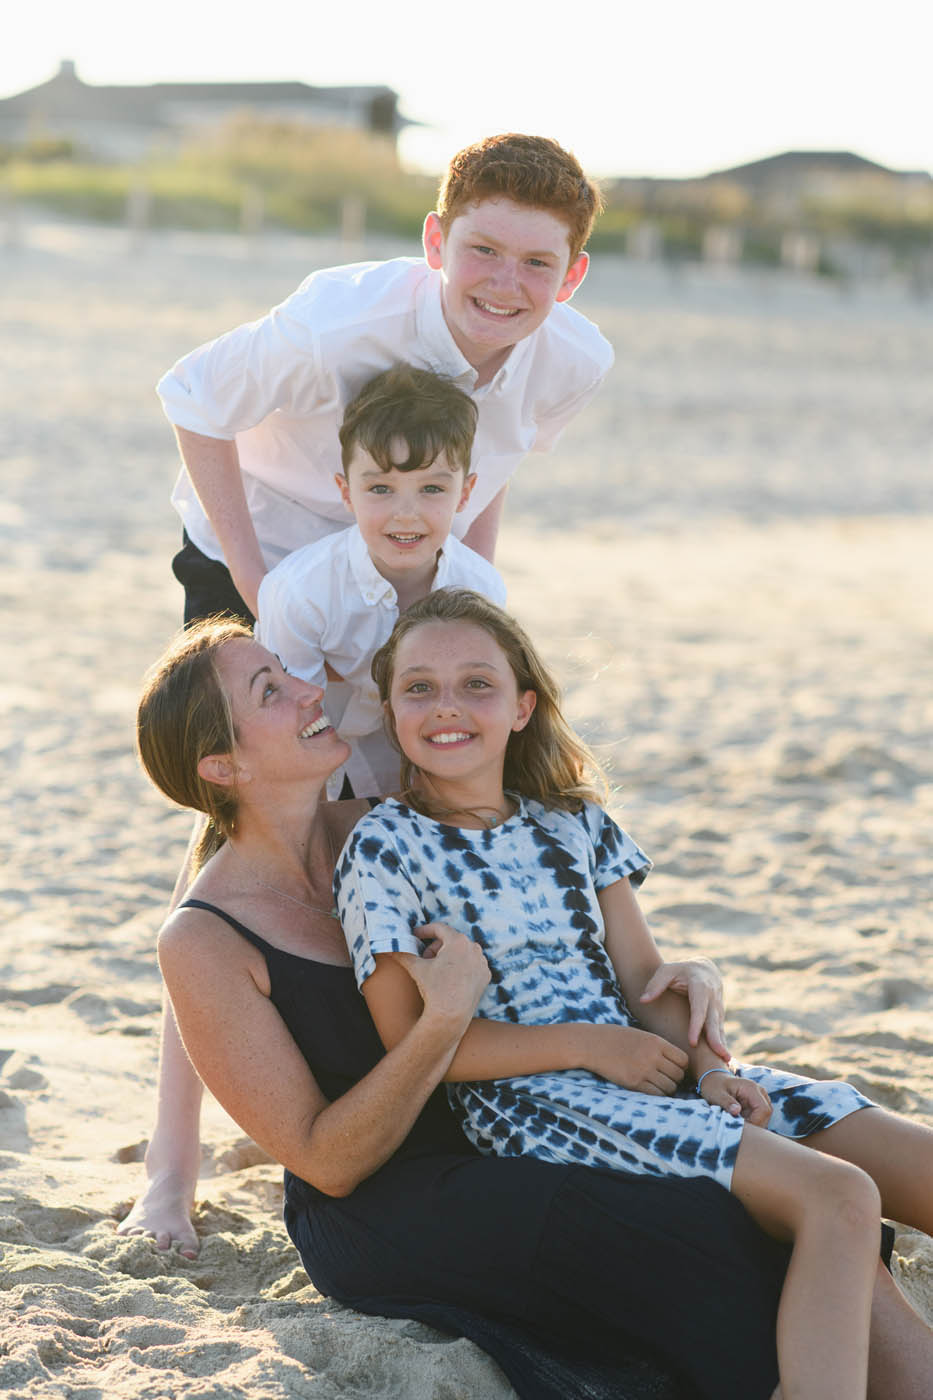 Family portraits in Avon Outer Banks